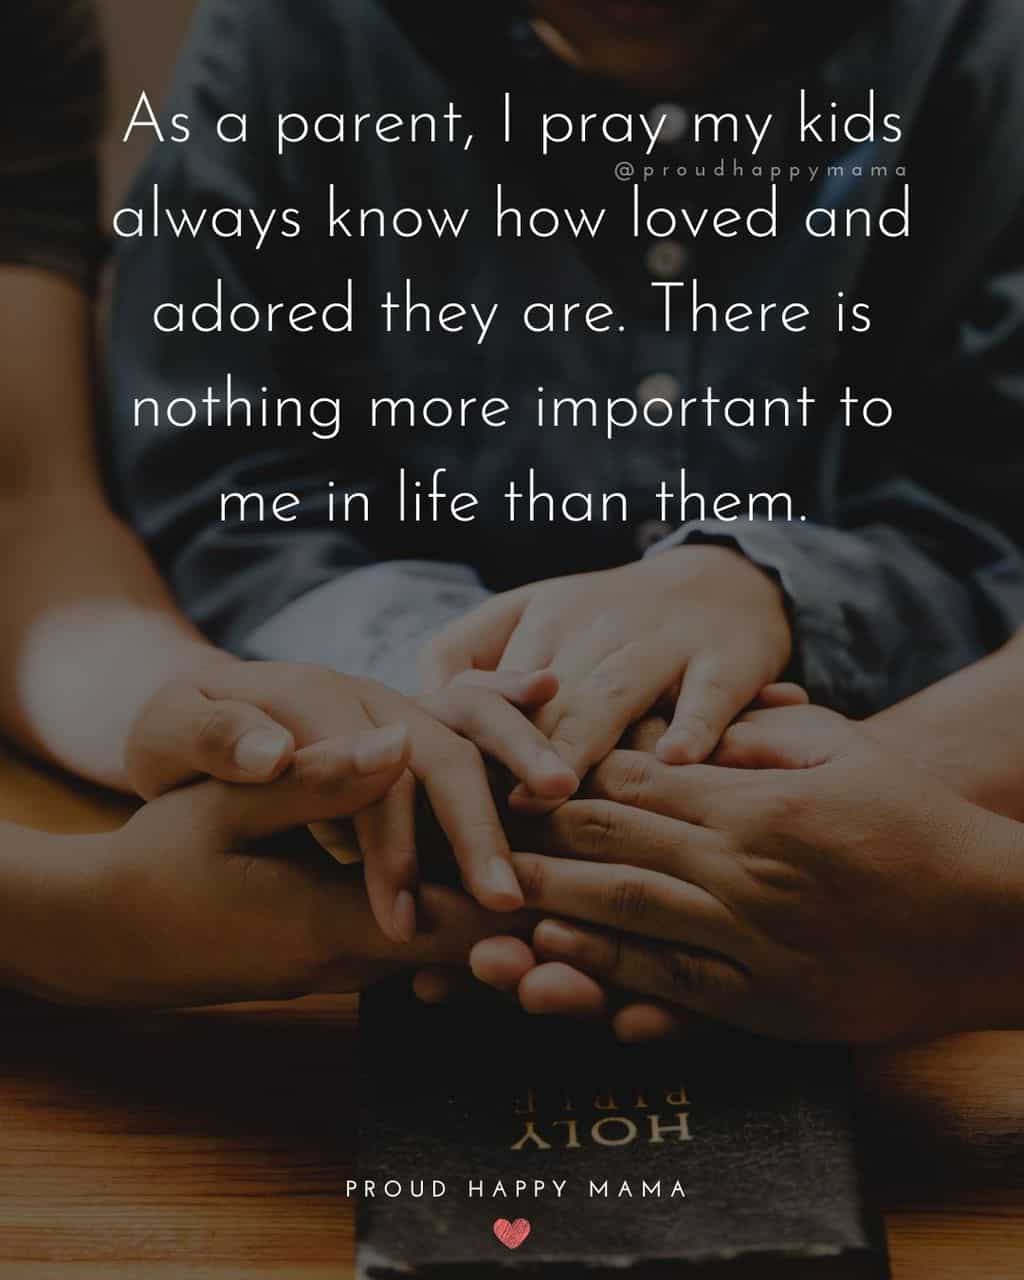 Parenting Quotes - As a parent, I pray my kids always know how loved and adored they are. There is nothing more important to me in life